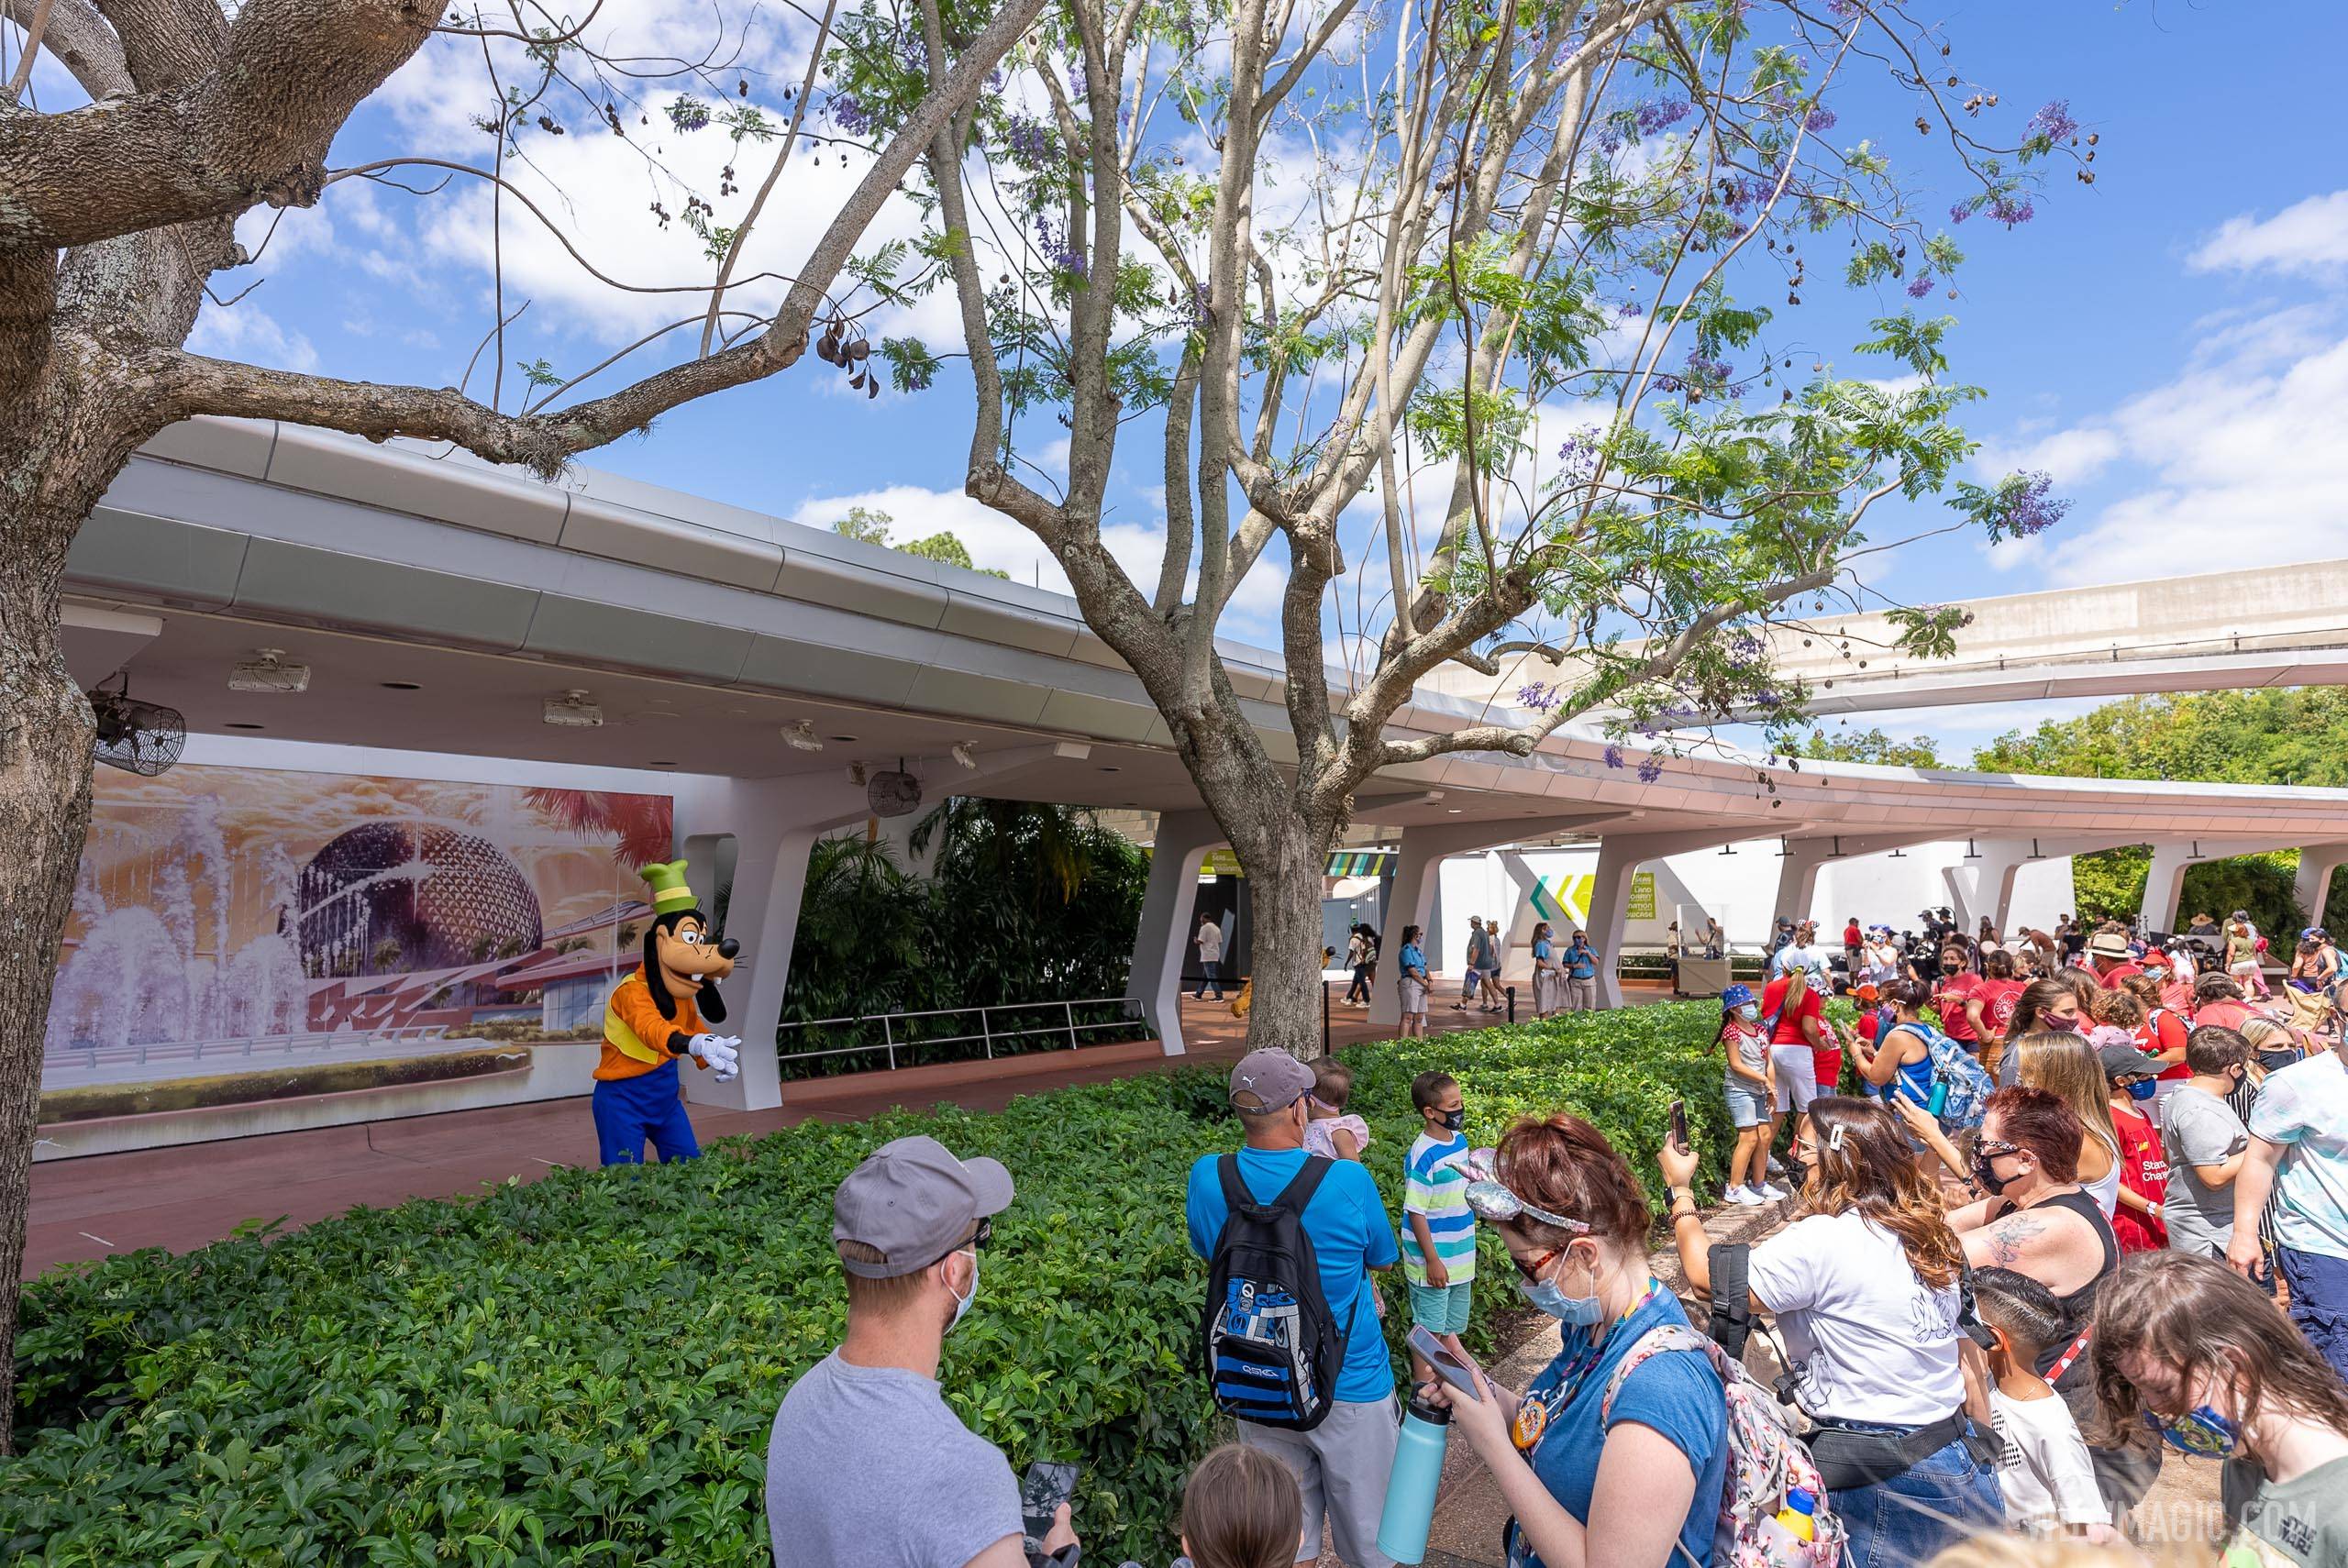 Character appearances remain limited at Disney's theme parks